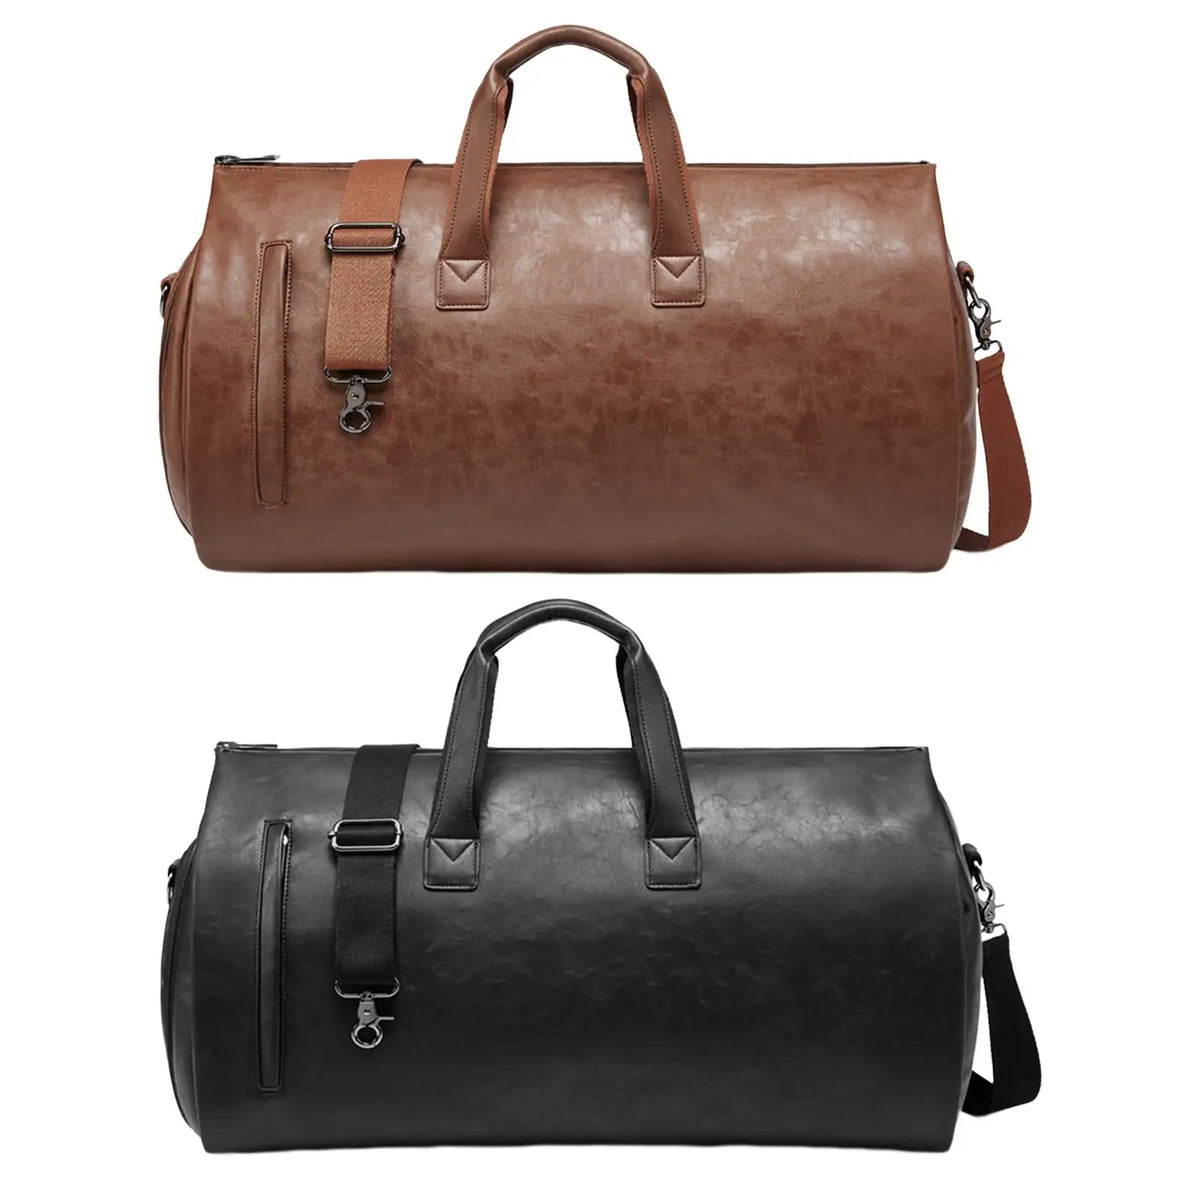 Ultimate Adventure Leather Duffle Bag: Spacious, Waterproof, and Stylish with Shoe Compartment